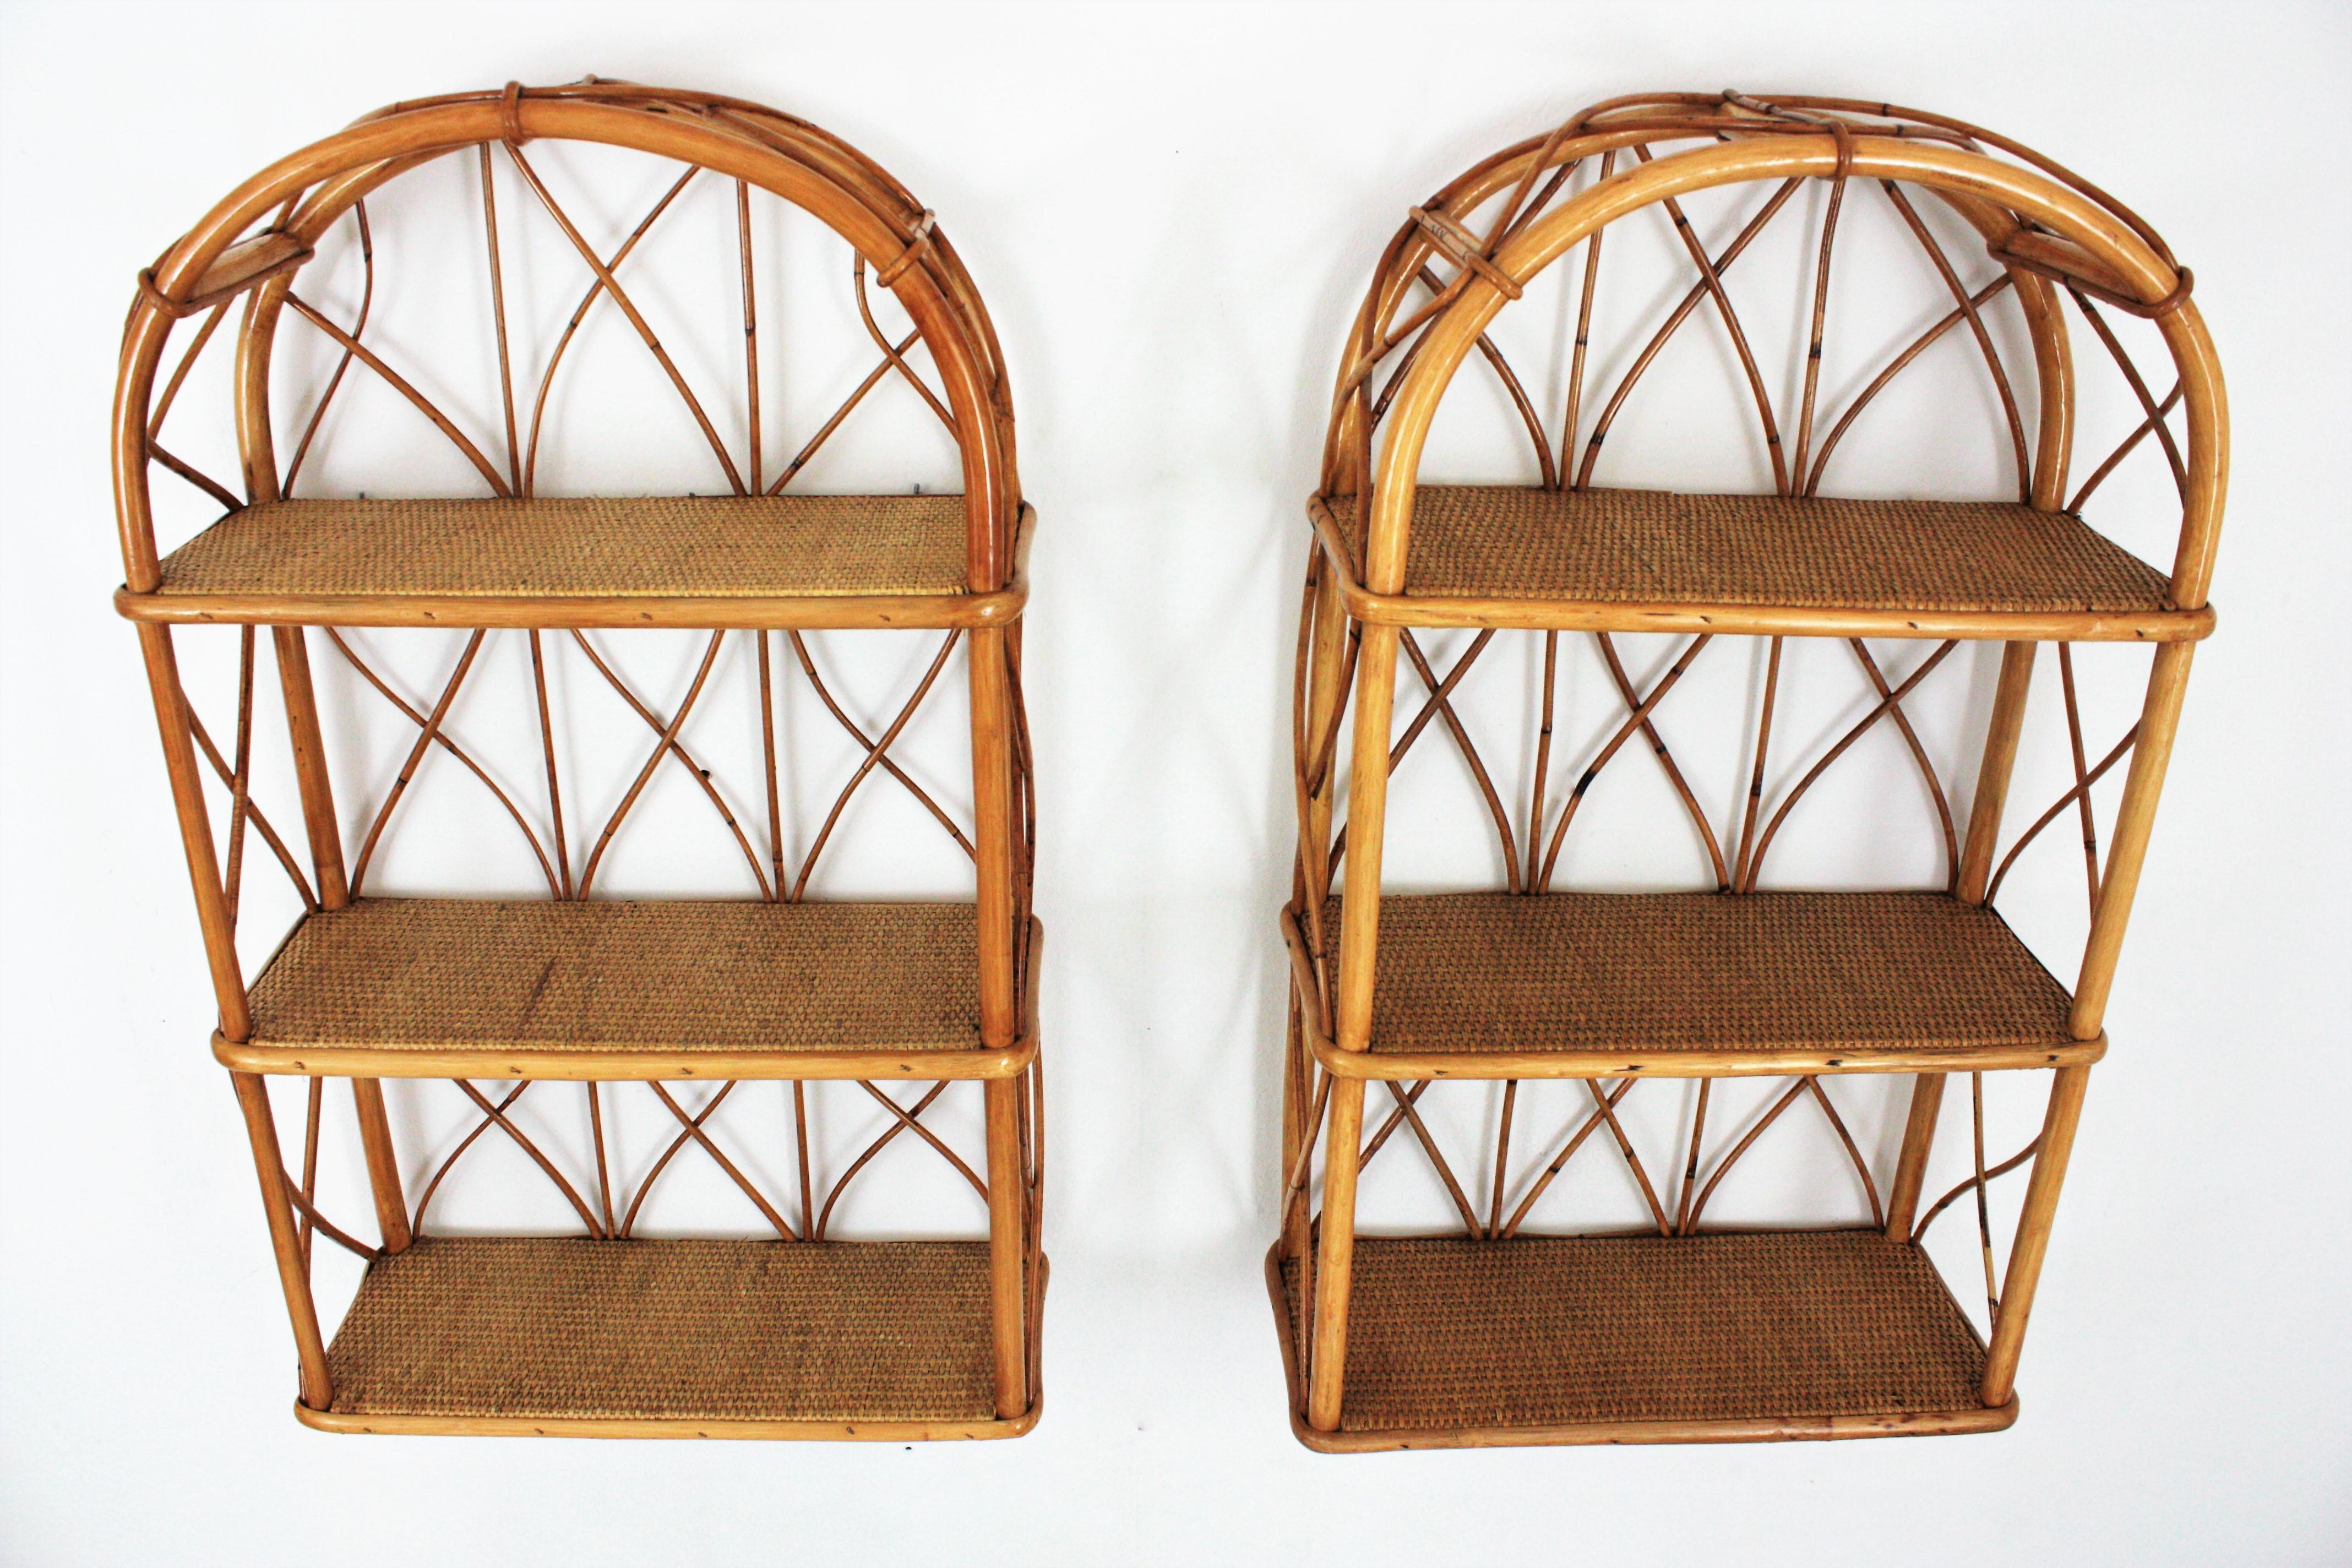 Pair of Bamboo and Rattan Wall Shelves with Round Tops 8